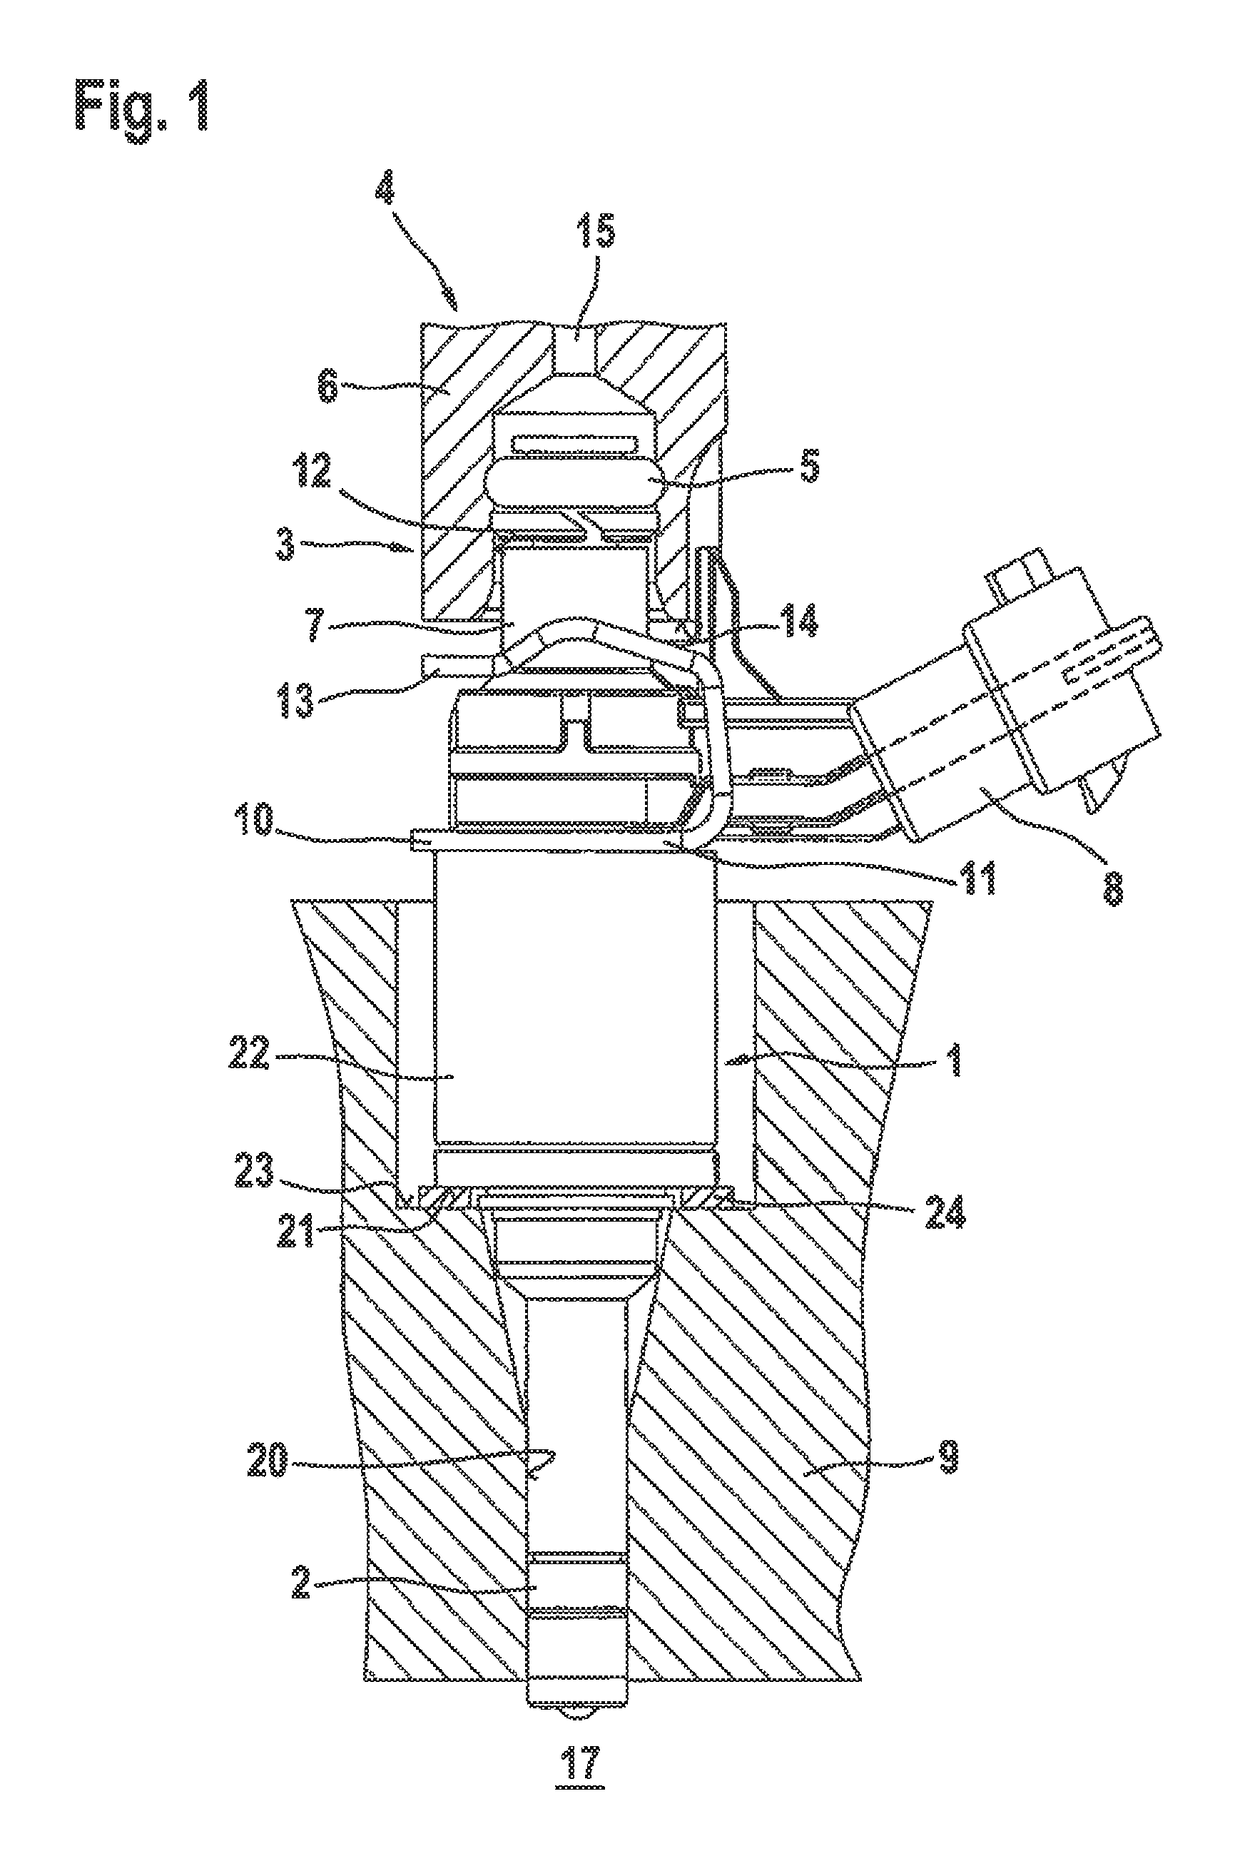 Decoupling element for a fuel injection device